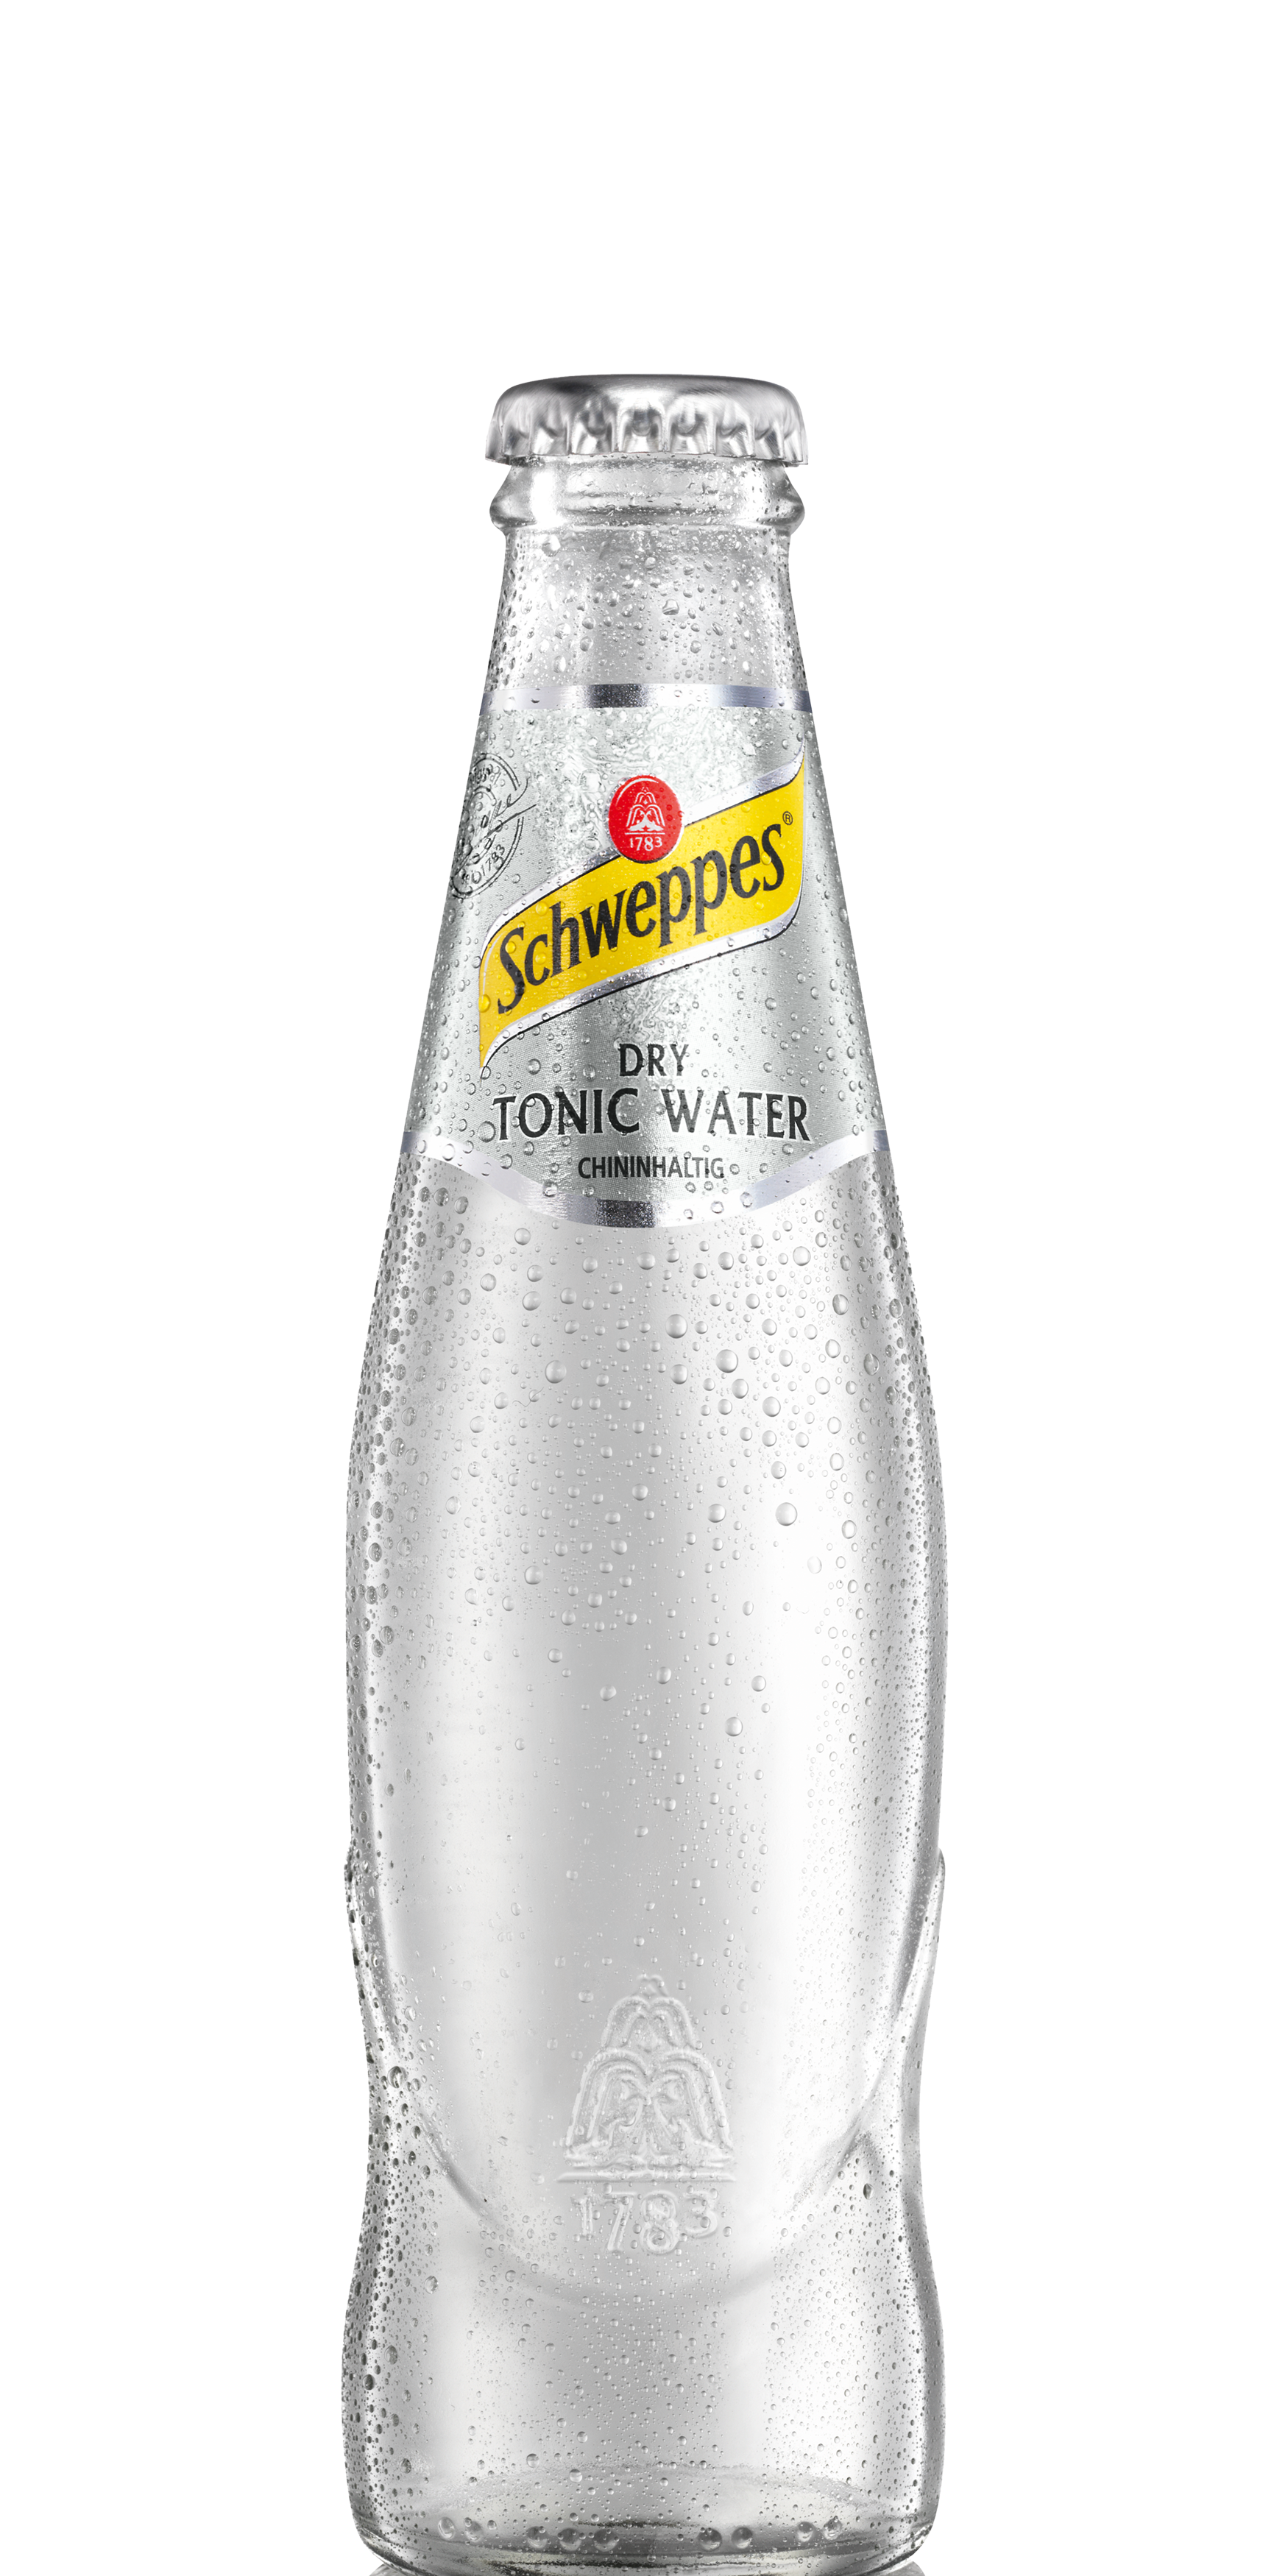 Schweppes-Dry-Tonic-Water-200ml-3500h.png